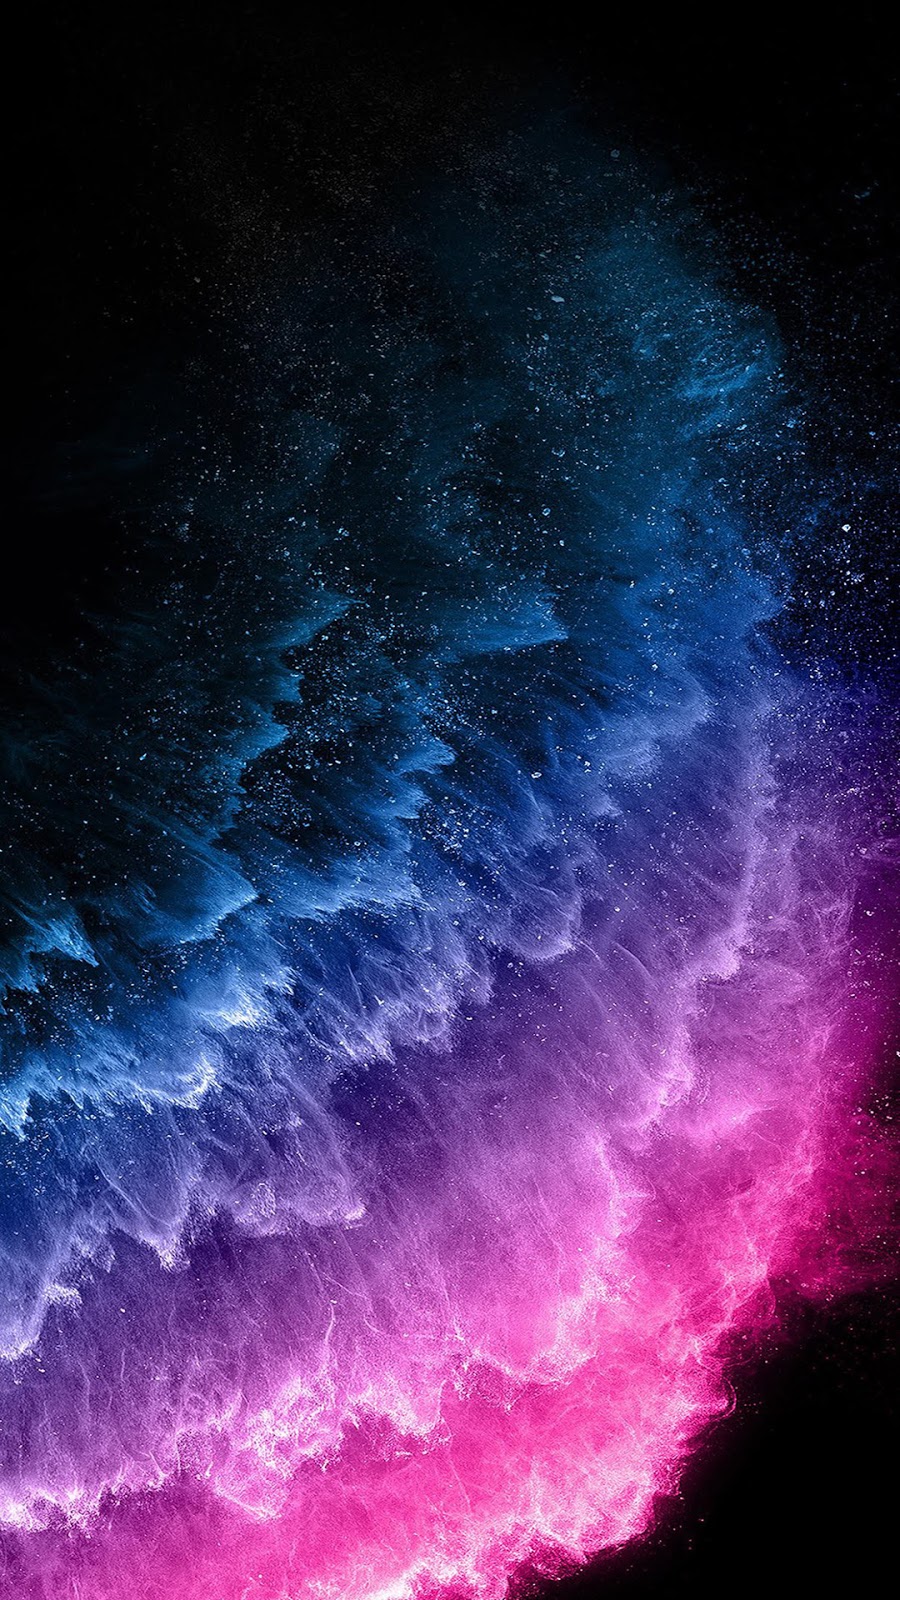 New Collection Full HD Wallpaper for iPhone 1080 x 1920 (07)